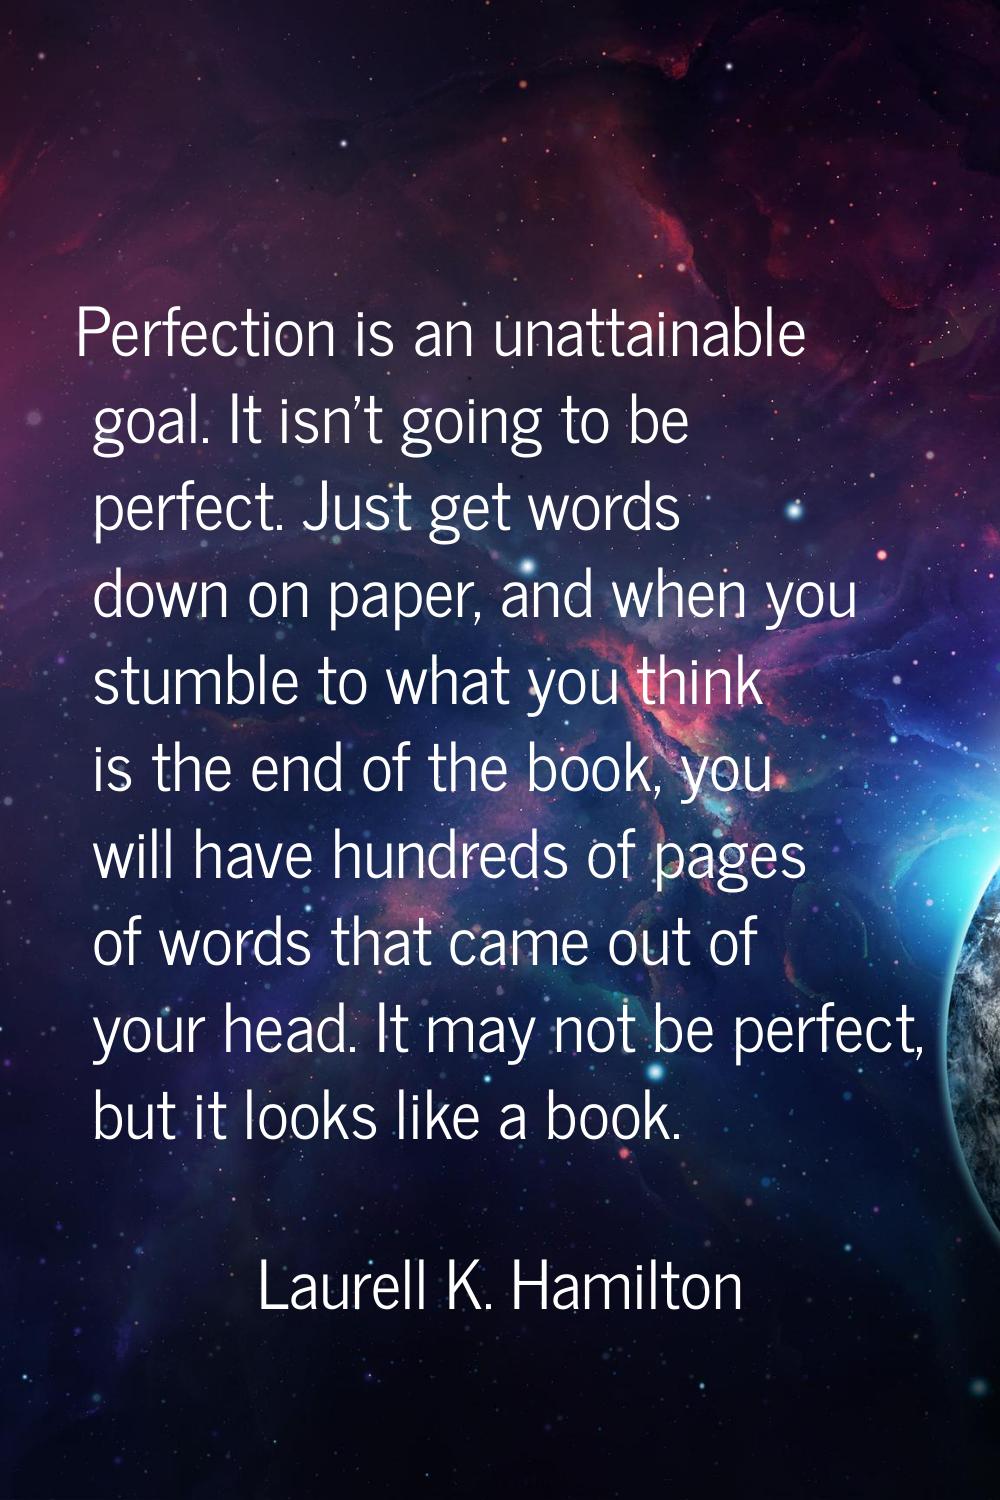 Perfection is an unattainable goal. It isn't going to be perfect. Just get words down on paper, and